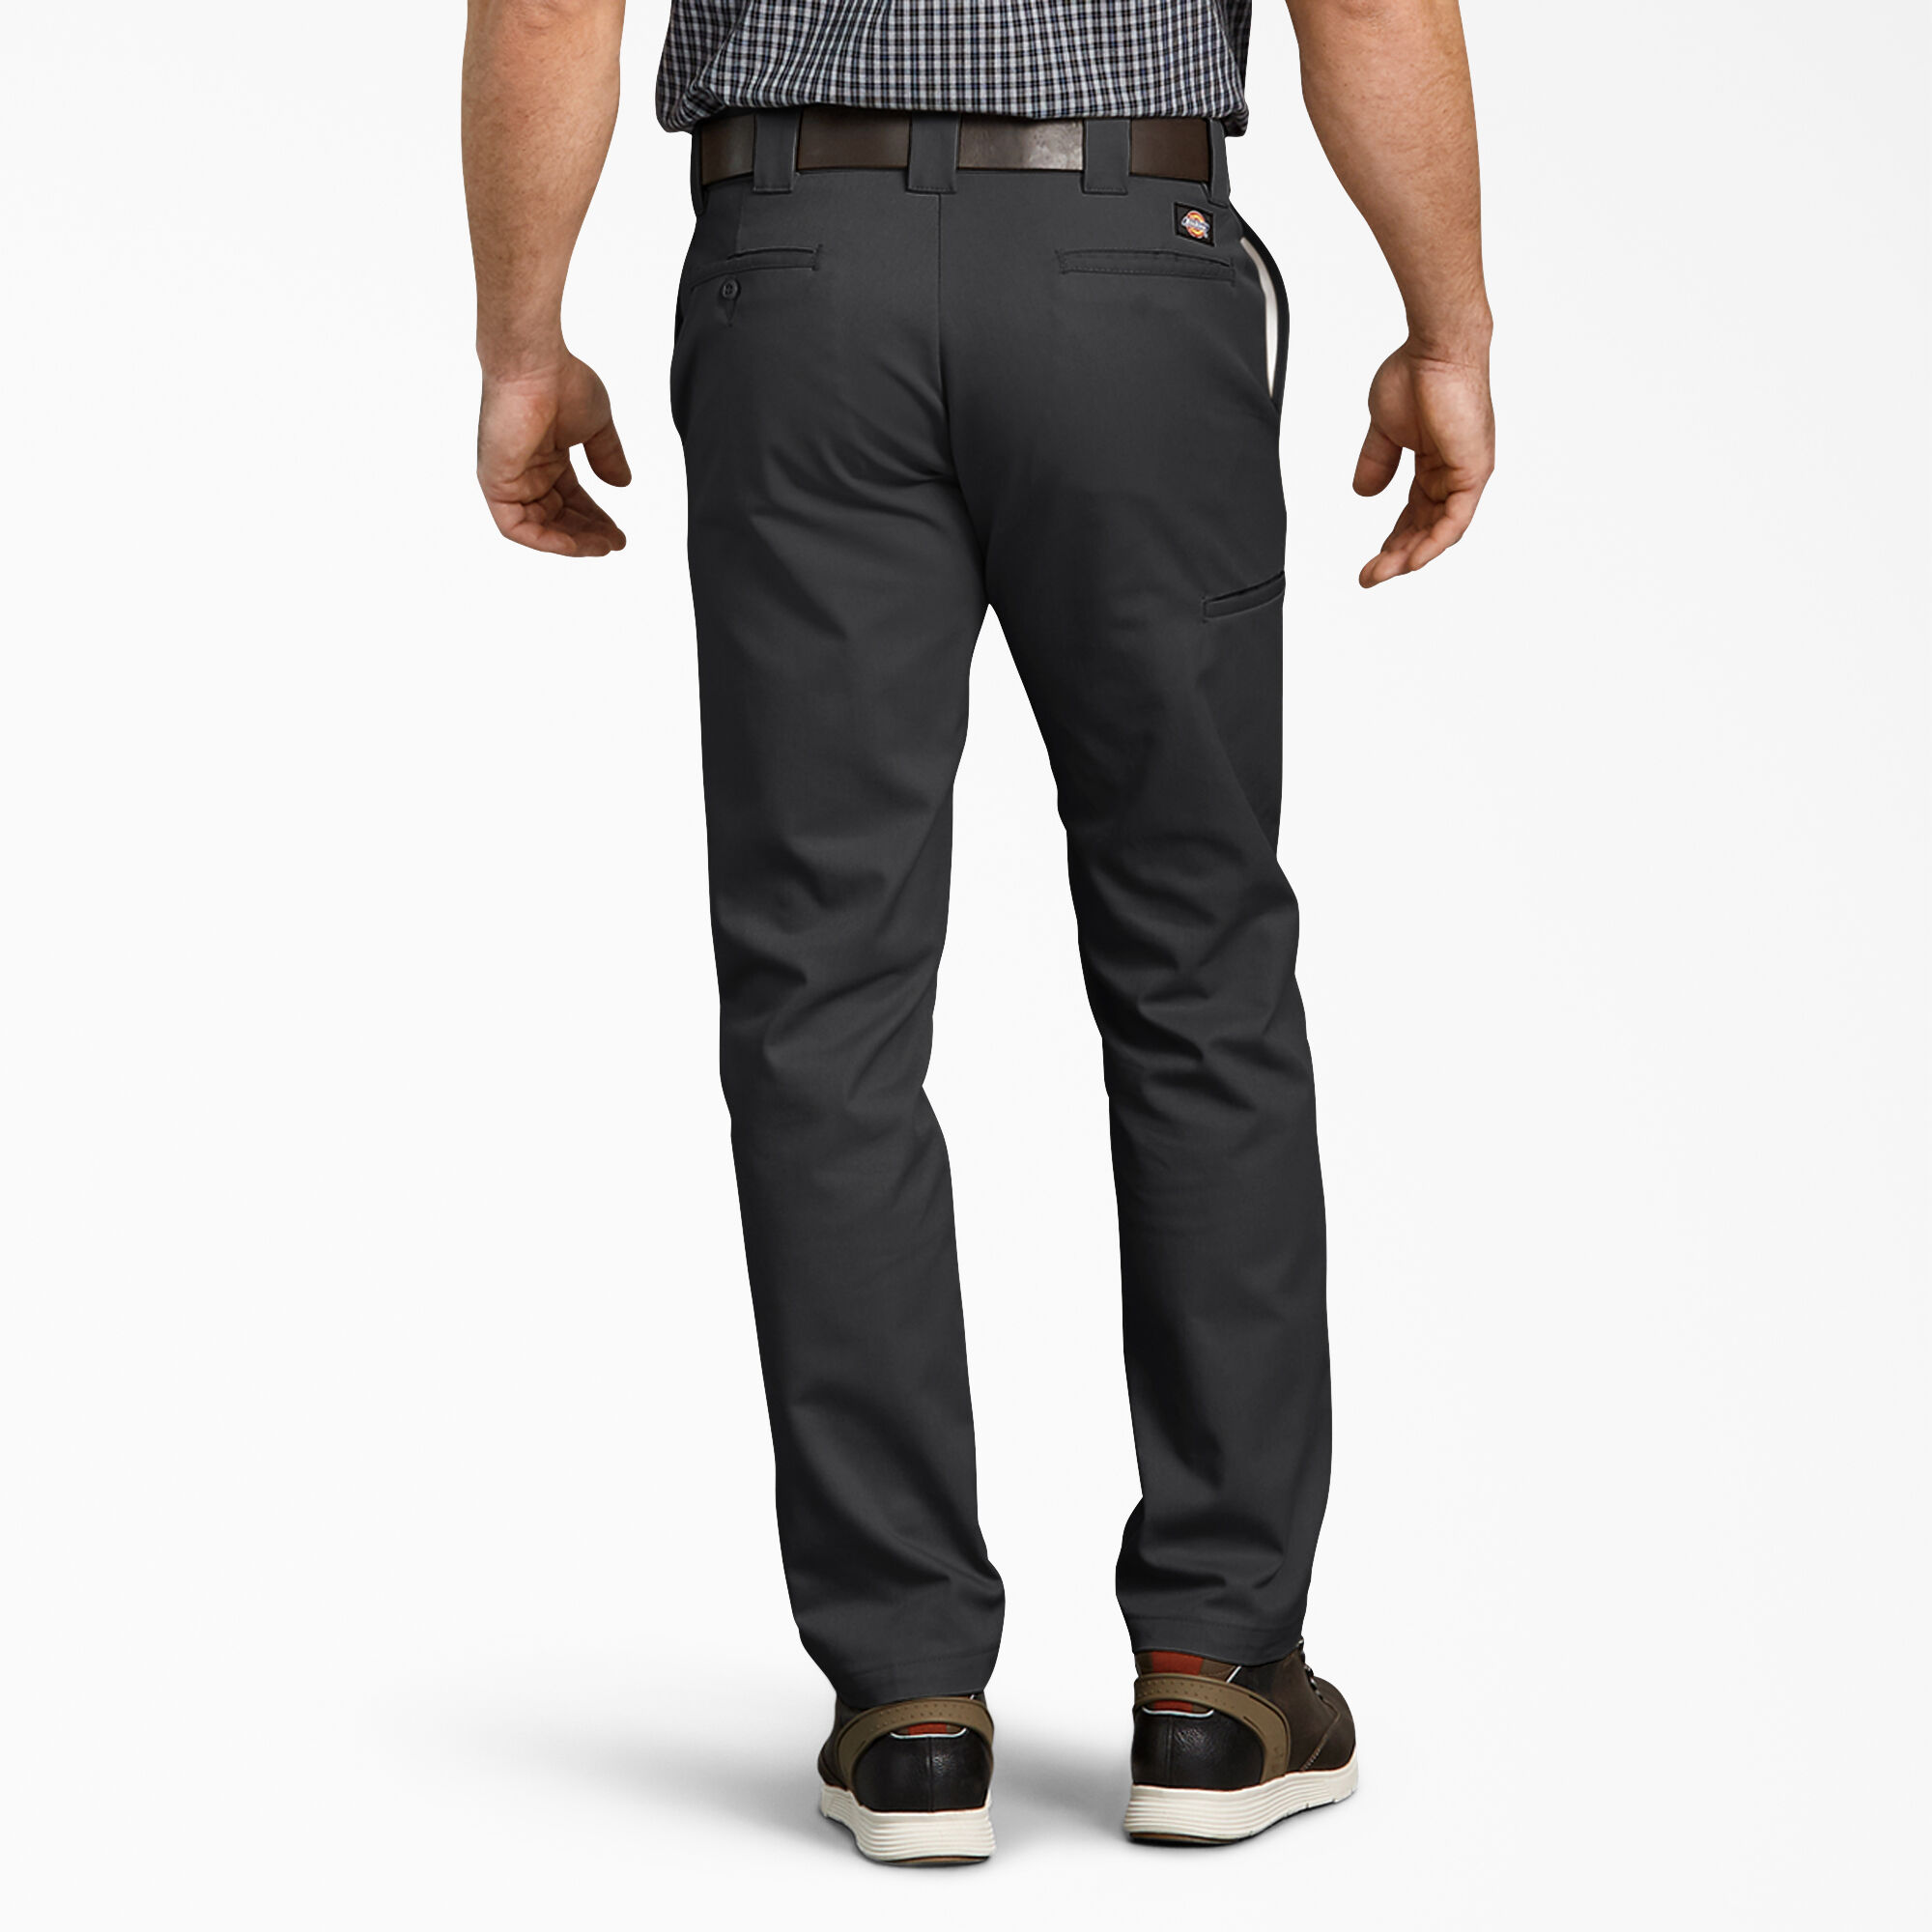 Stretched Slim Fit Pants Sits at Waist Trousers with 5 Jeans for Men Pockets